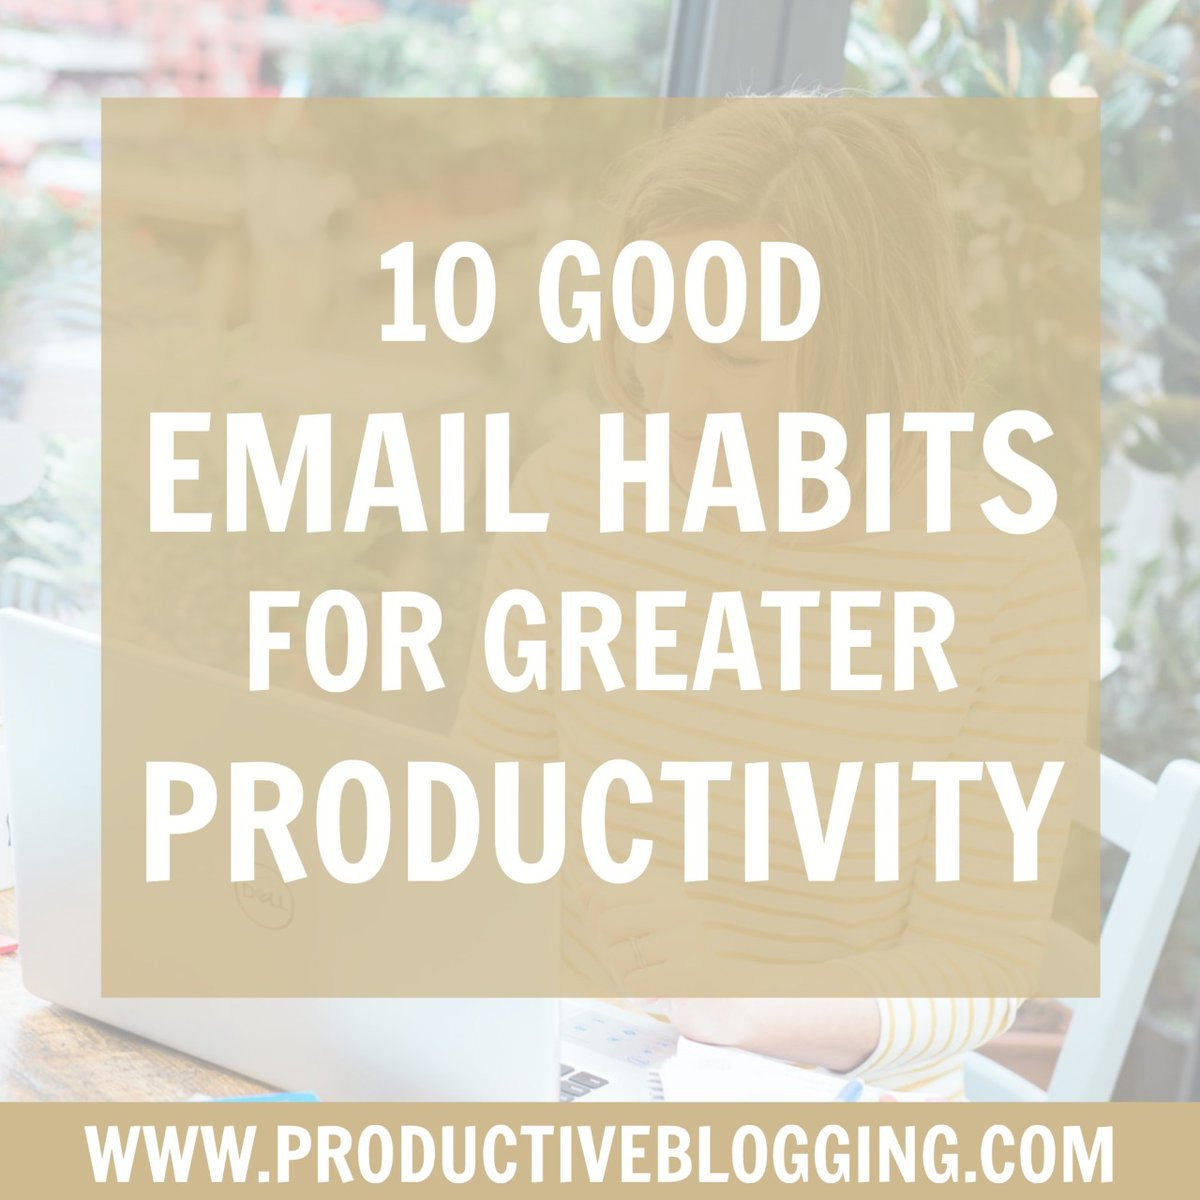 One thing that can totally sabotage productivity (and often eat up whole days!) is the dreaded email inbox. Here are 10 good email habits for greater productivity >>> bit.ly/2HxcZGn #emailhabits #productivitytips #productivityhabits